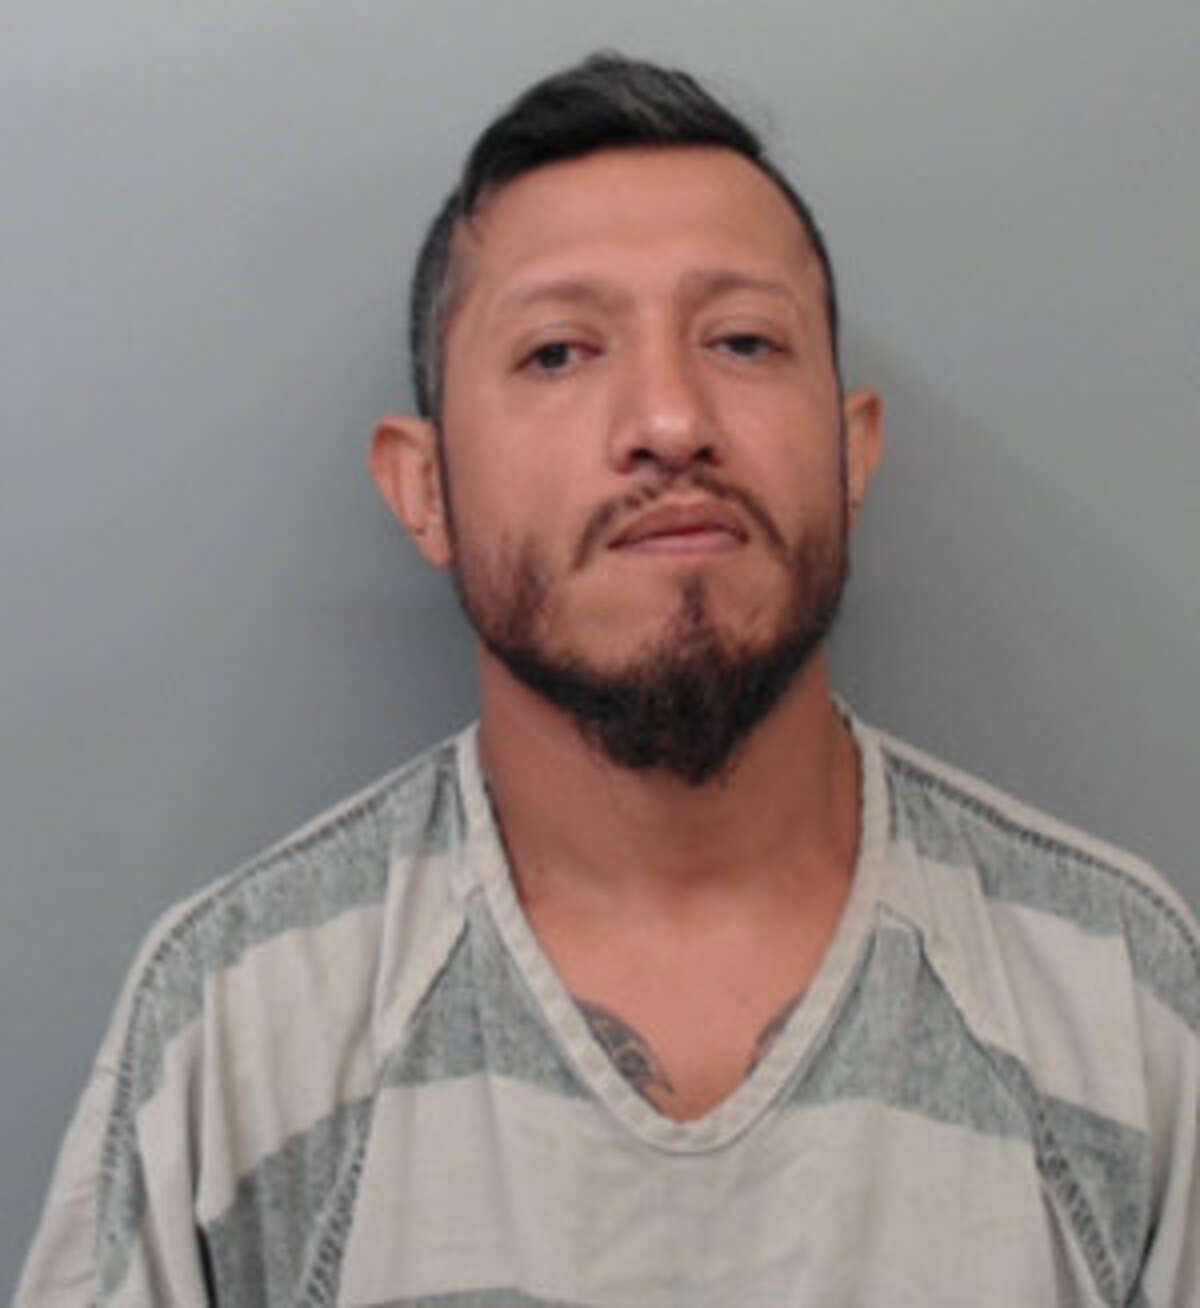 Joaquin Morales, 37, was charged with arson, aggravated assault with a deadly weapon, escape while confined, riot participation, criminal mischief, terroristic threat against a public servant, assault on a public servant and engaging in organized criminal activity.